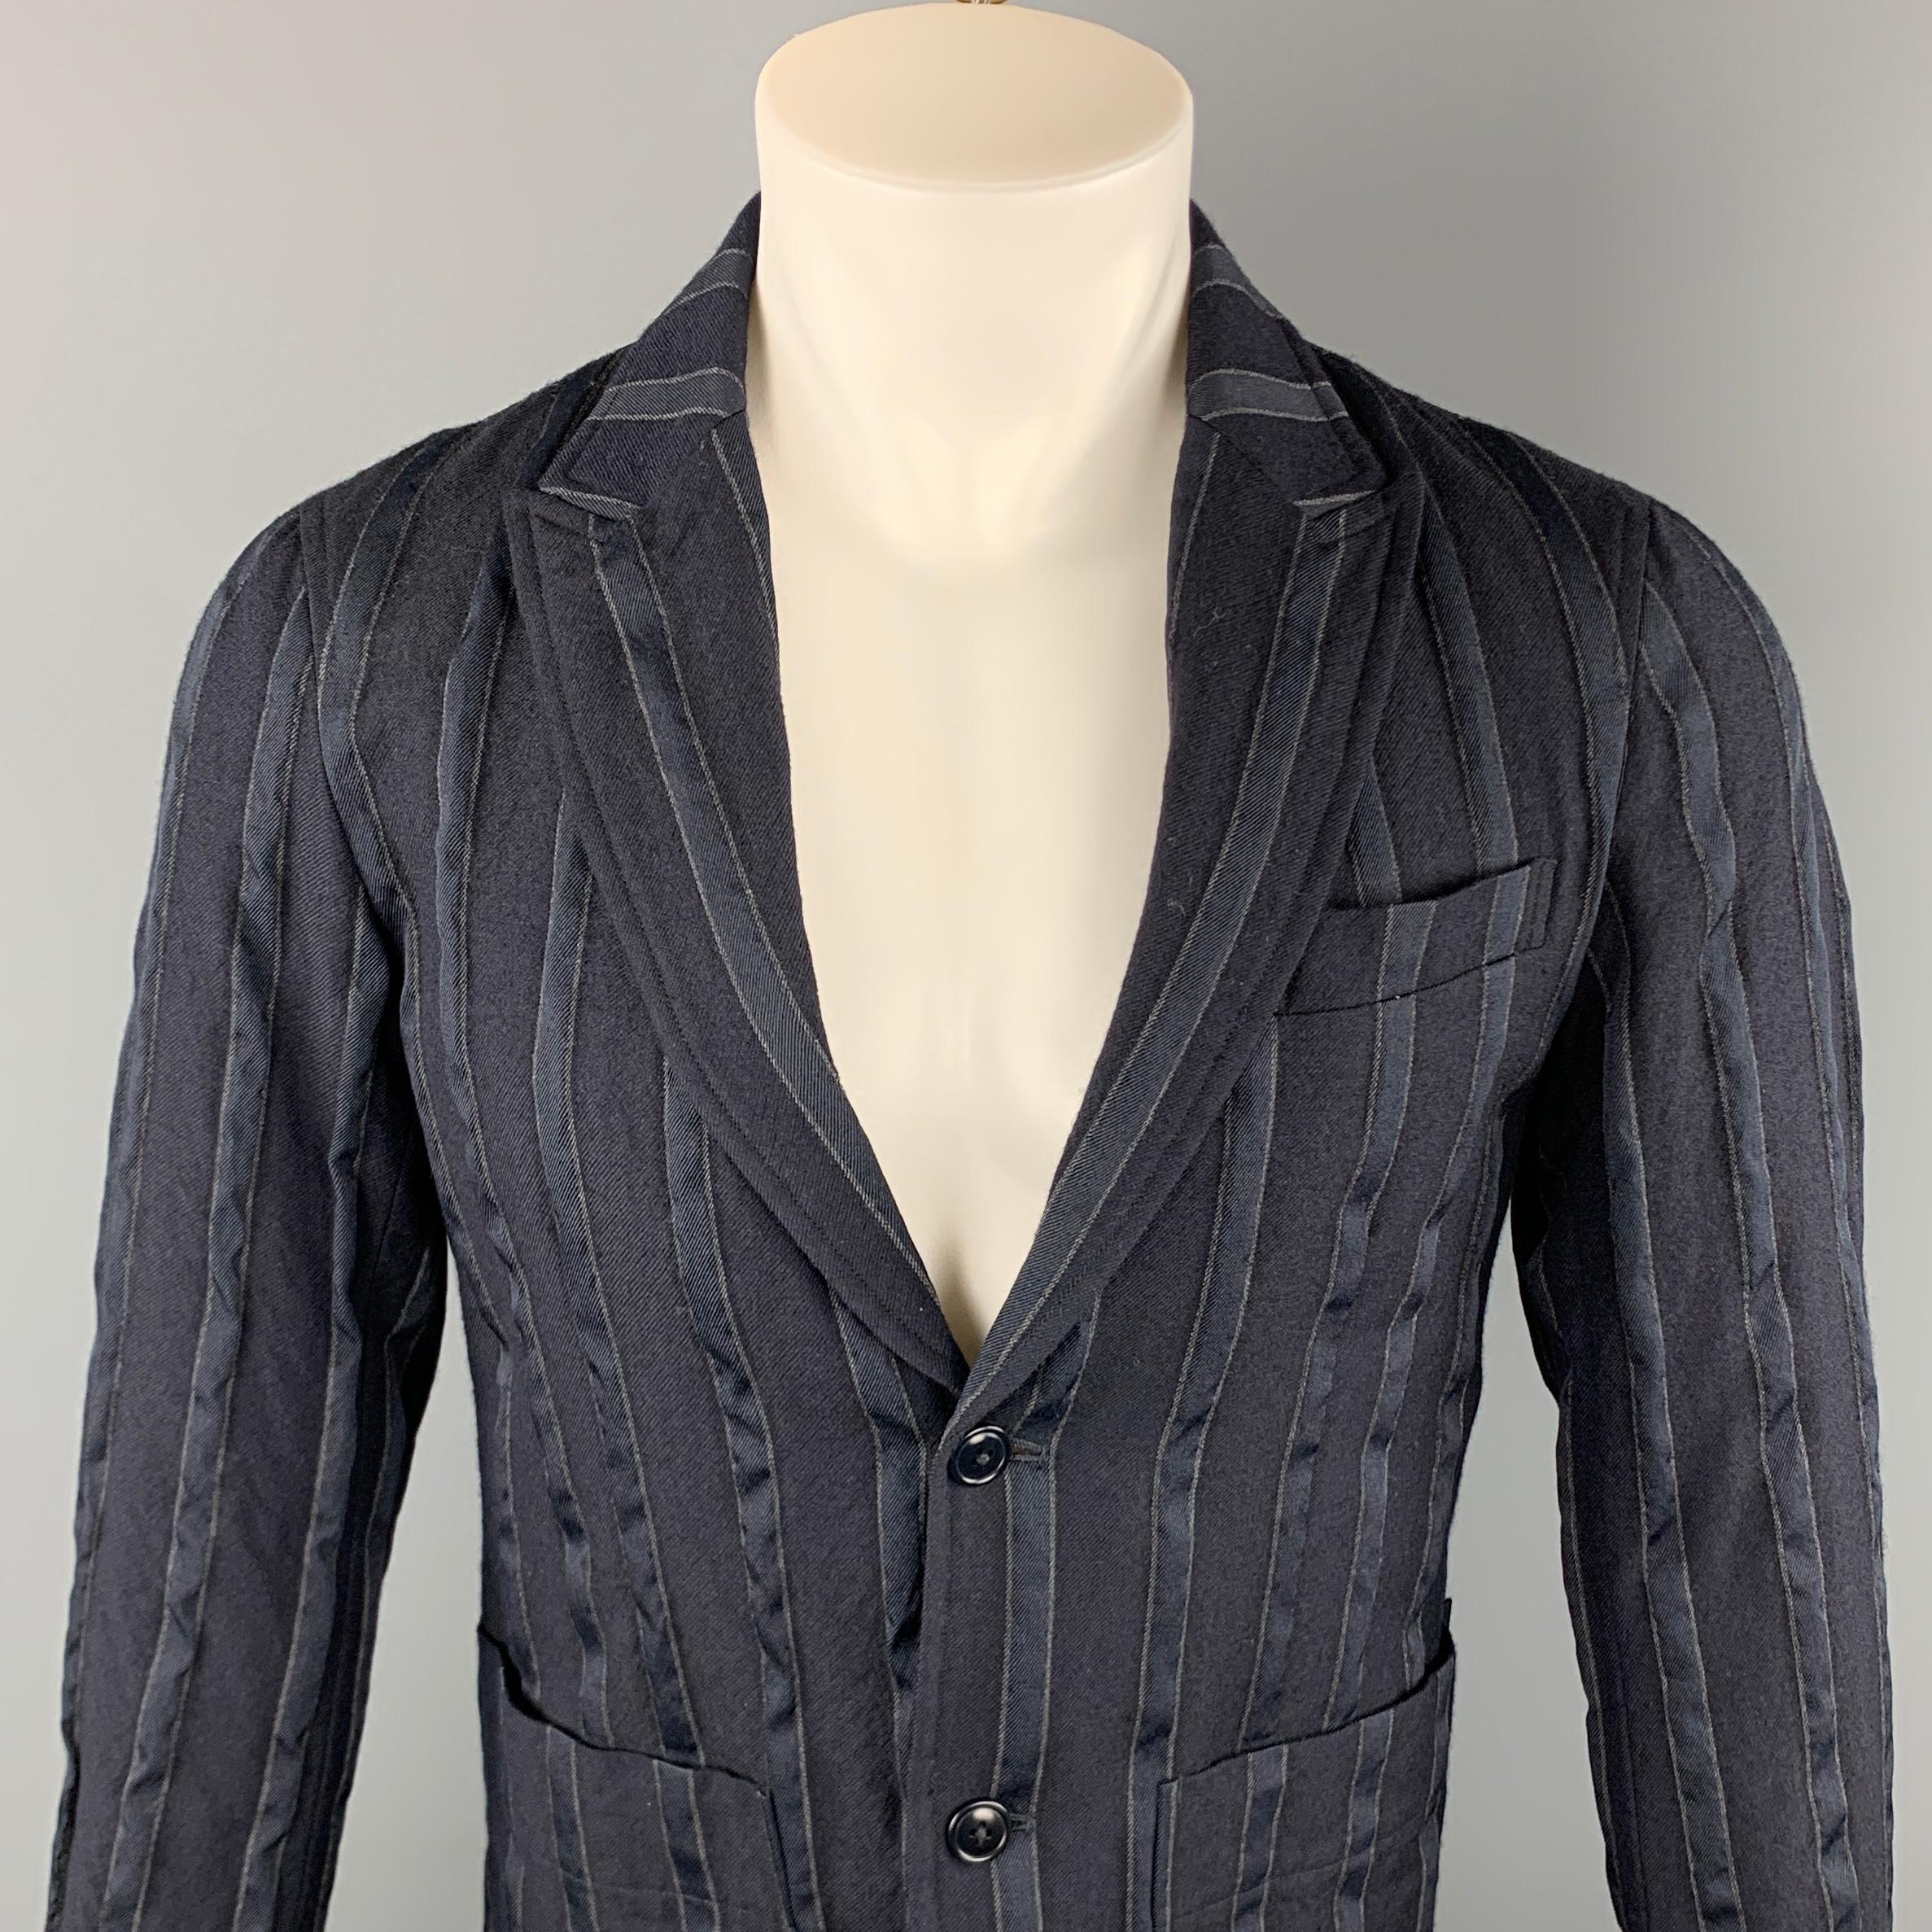 TS (S) sport coat comes in a navy stripe wool / polyester featuring a peak lapel, patch pockets, and a two button closure. Made in Japan. 

Excellent Pre-Owned Condition.
Marked: 1

Measurements:

Shoulder: 16 in. 
Chest: 38 in. 
Sleeve: 24.5 in.